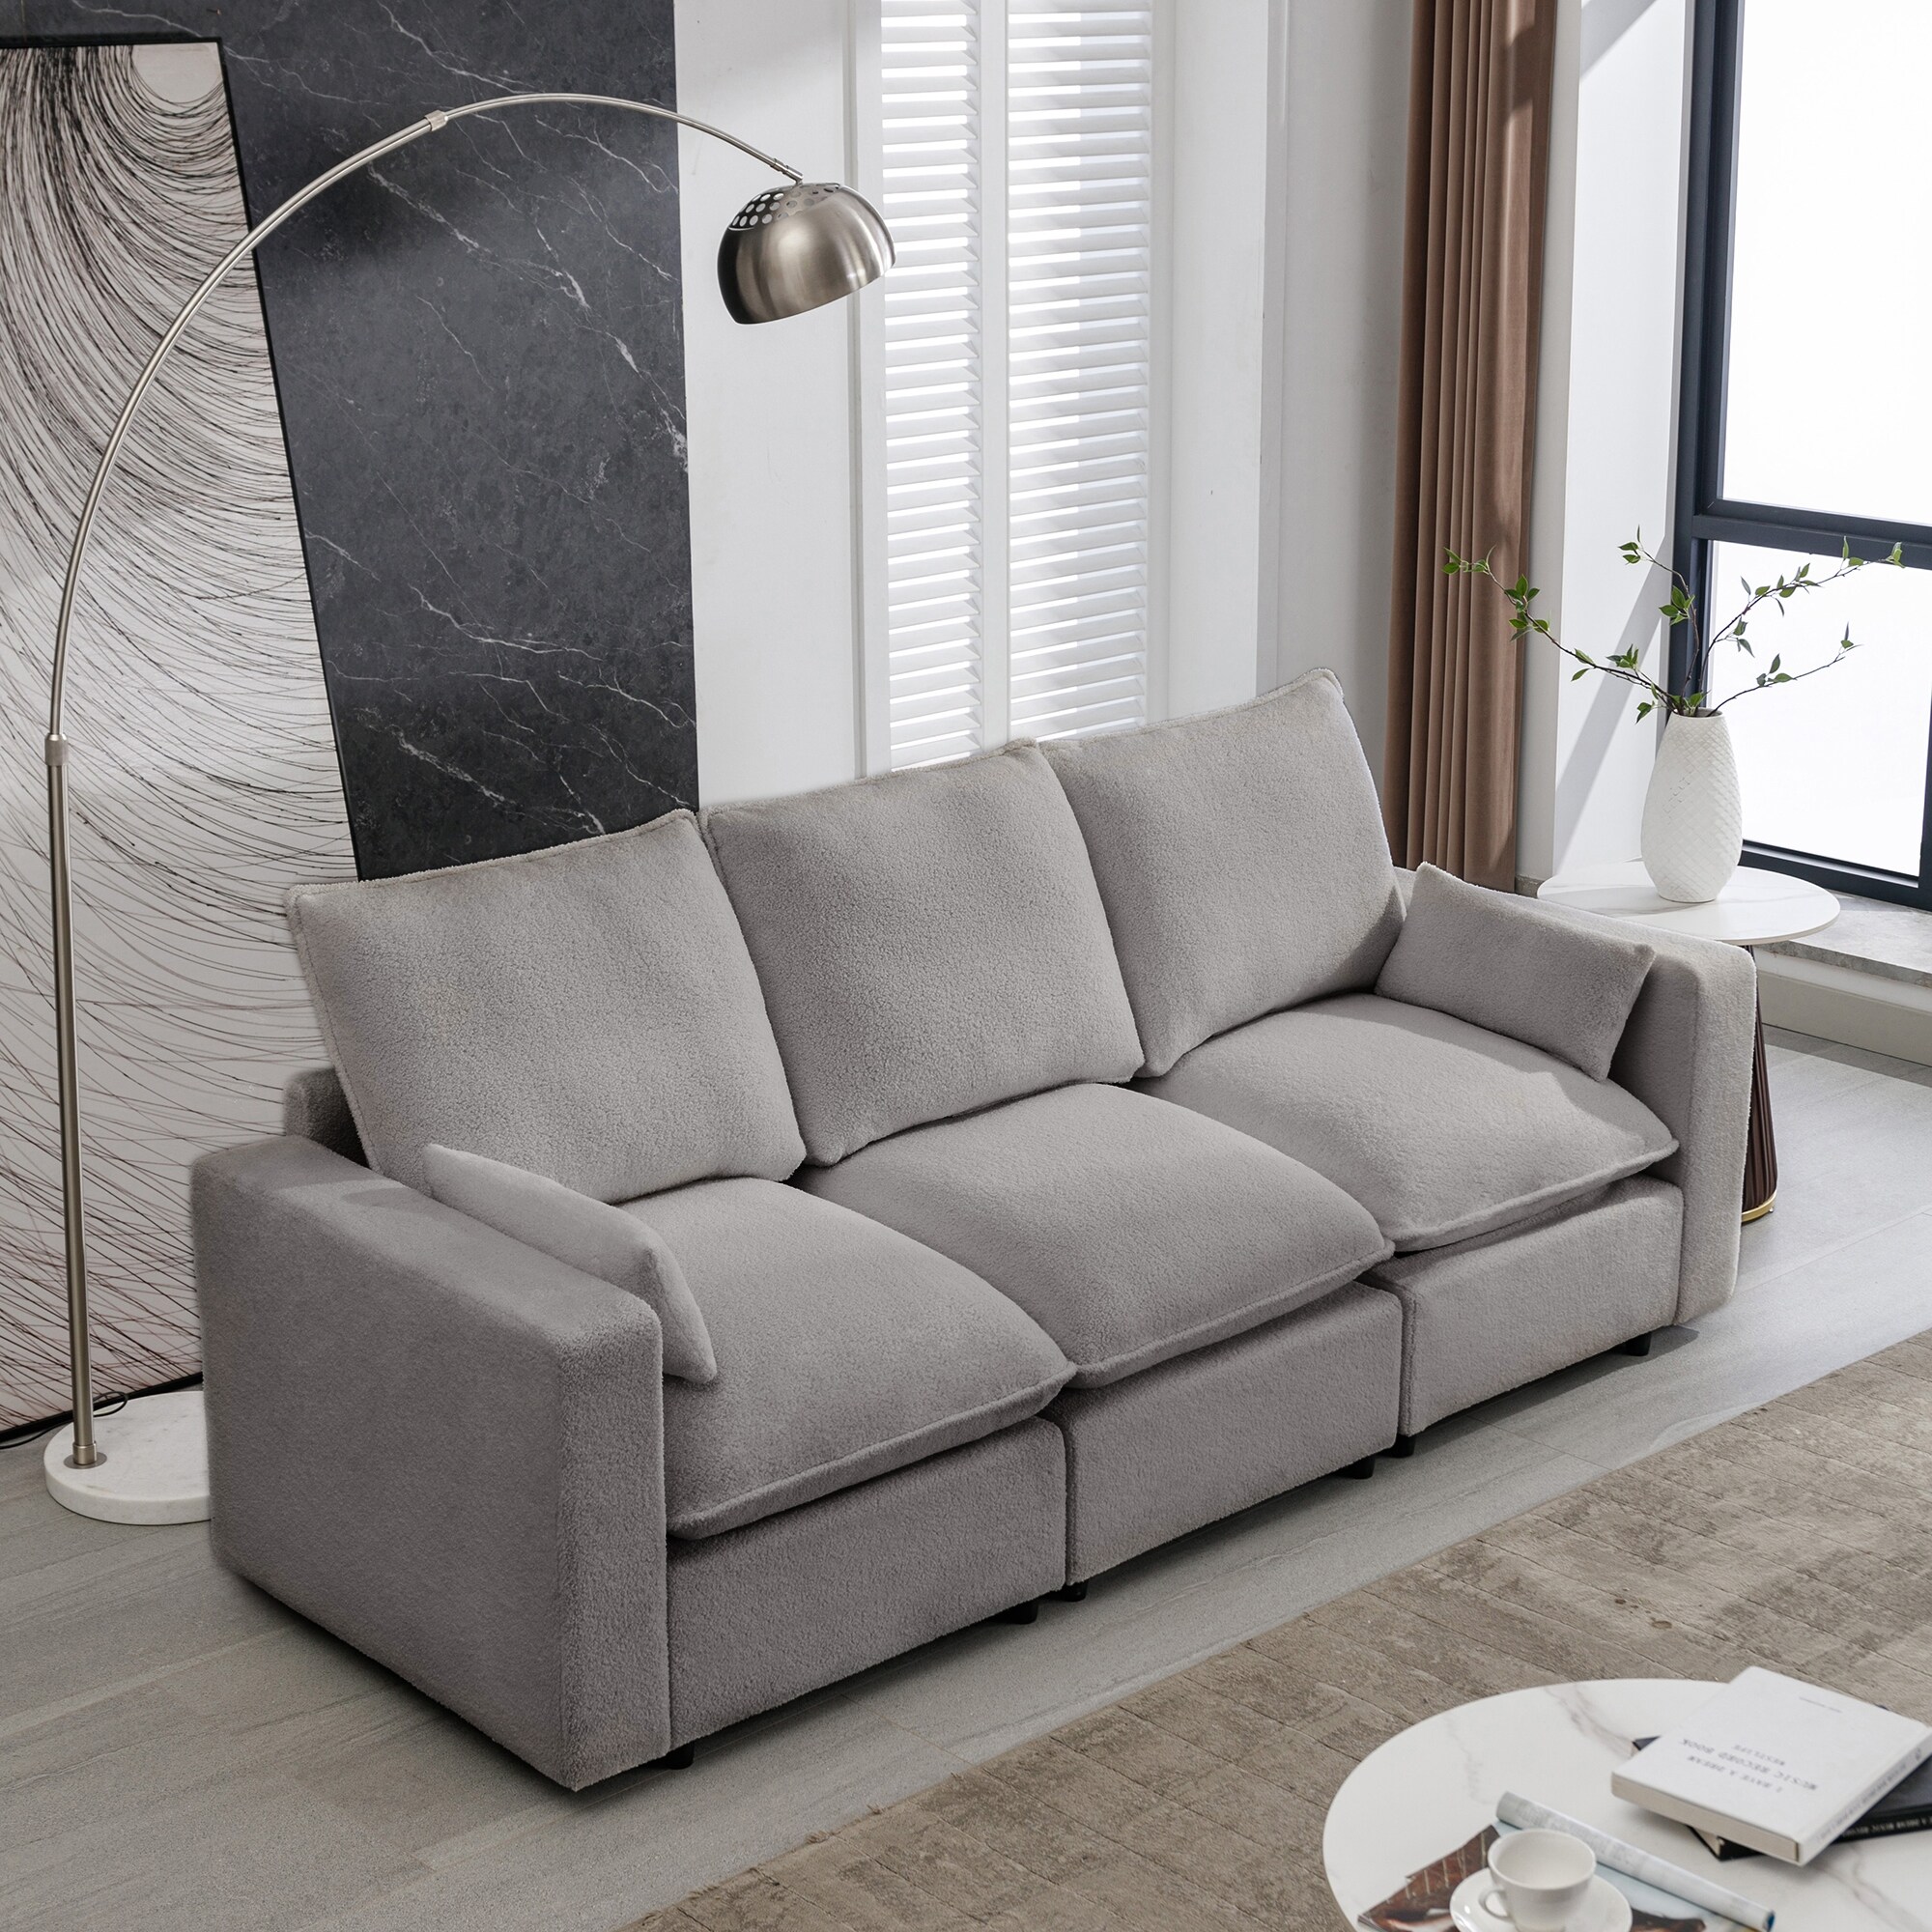 Teddy Fabric 3 Seater Sofa Removable Back and Seat Cushions Couch with 2  Throw Pillows and Square Arms for Living Room Sofa - Bed Bath & Beyond -  38428878